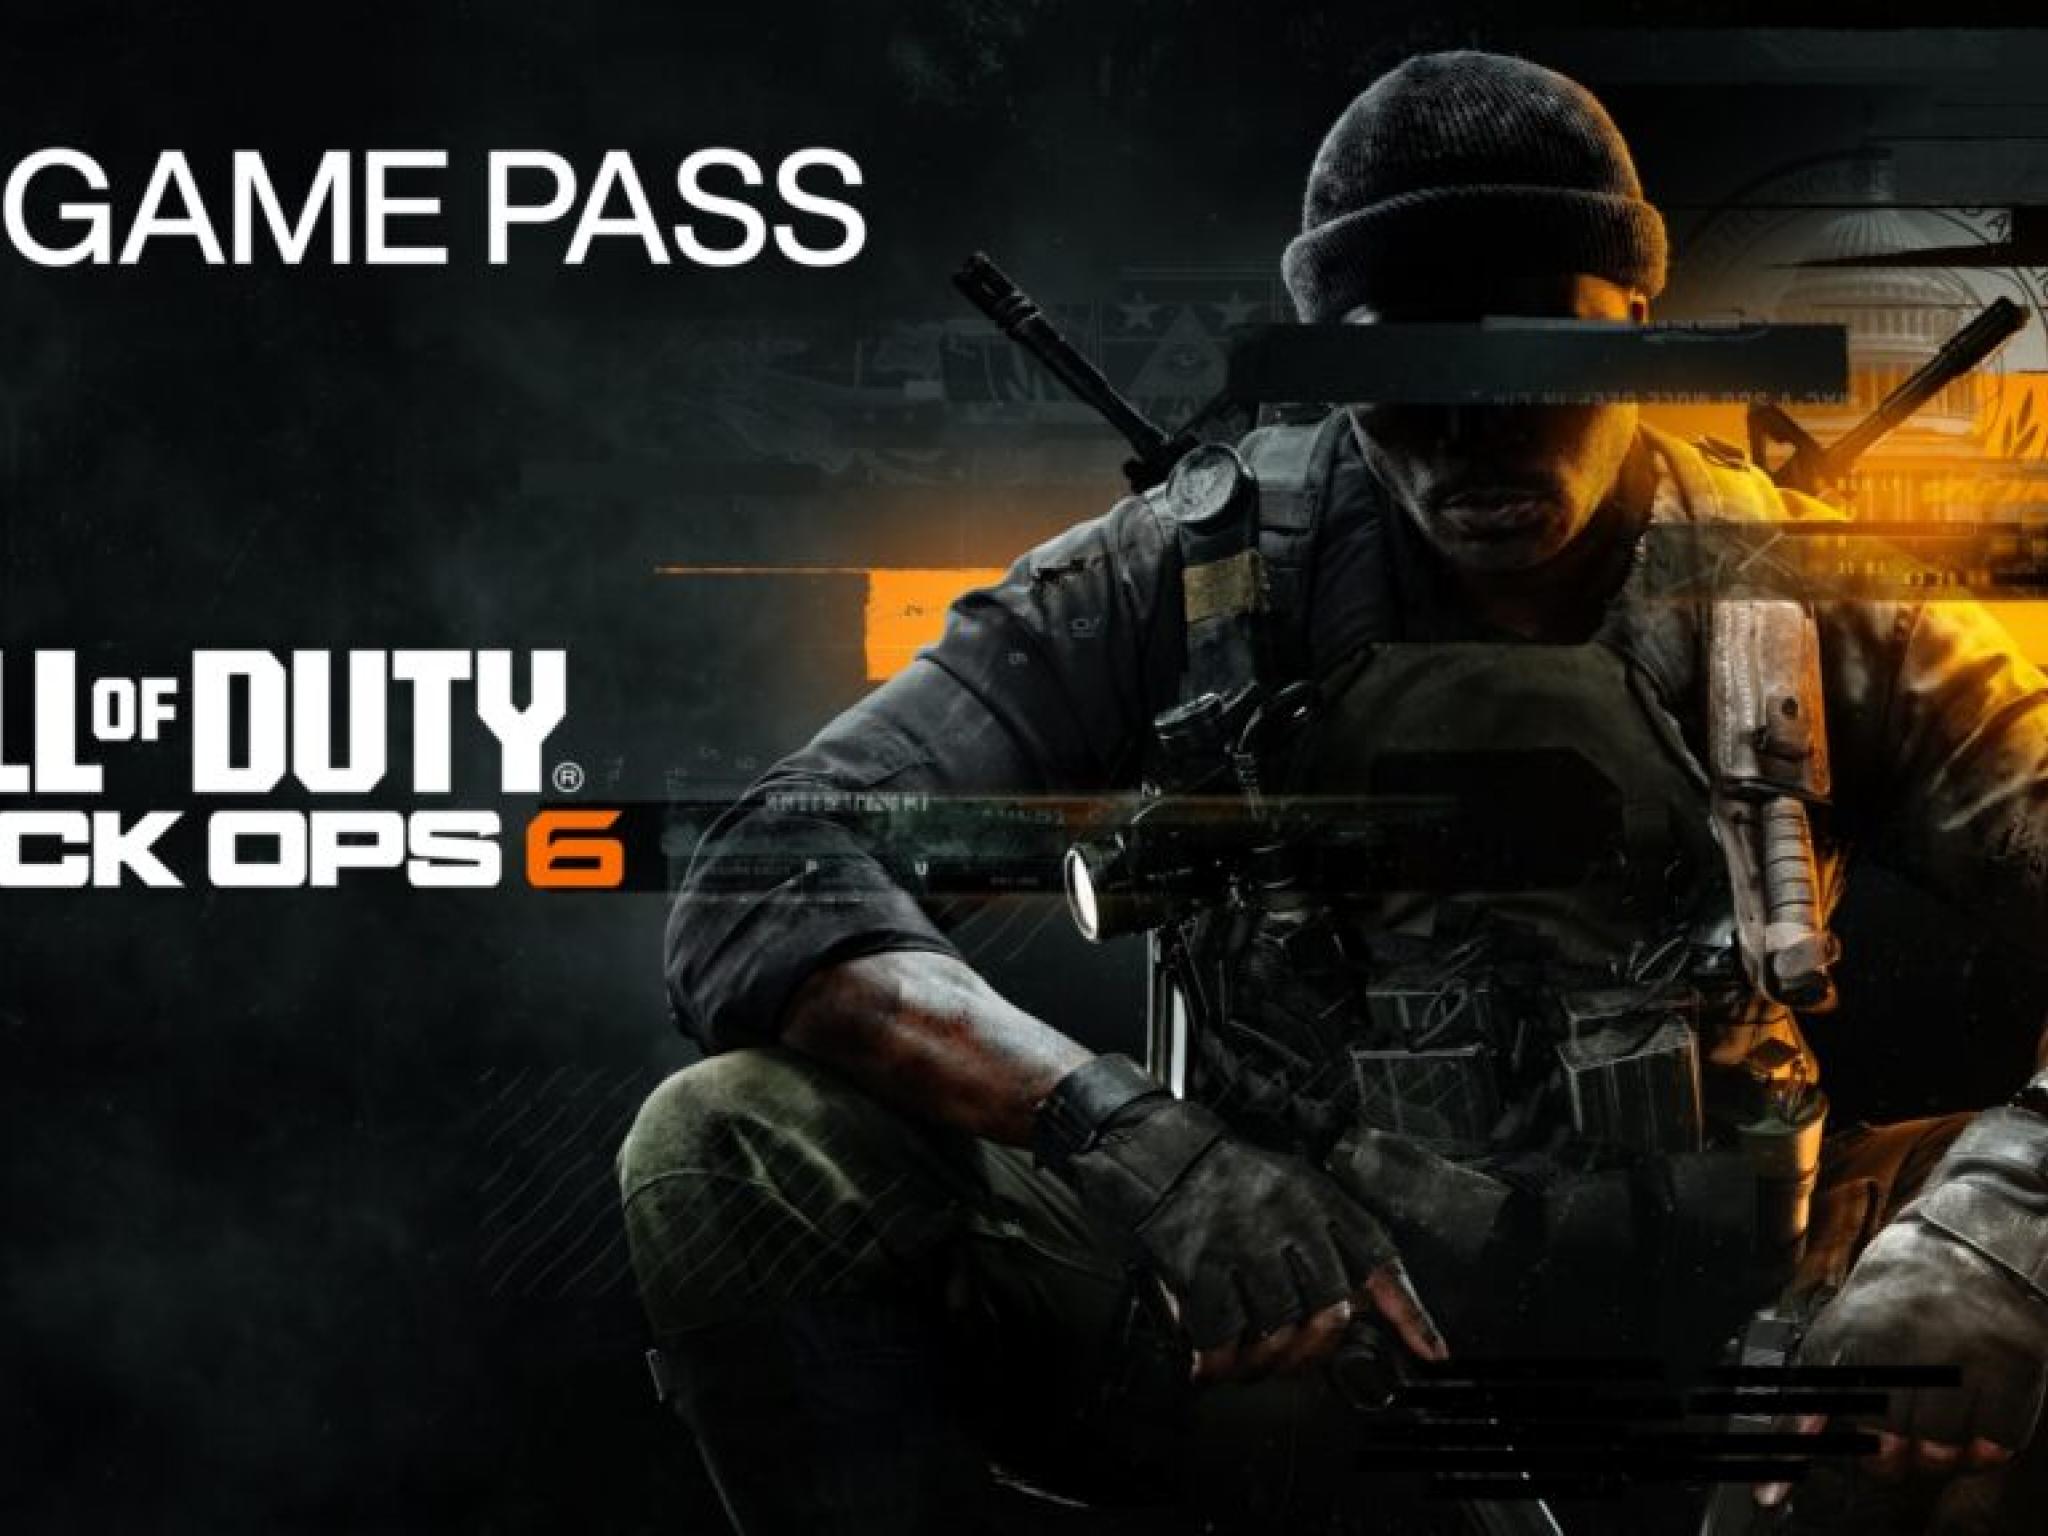  microsoft-confirms-call-of-duty-black-ops-6-on-xbox-game-pass-at-launch 